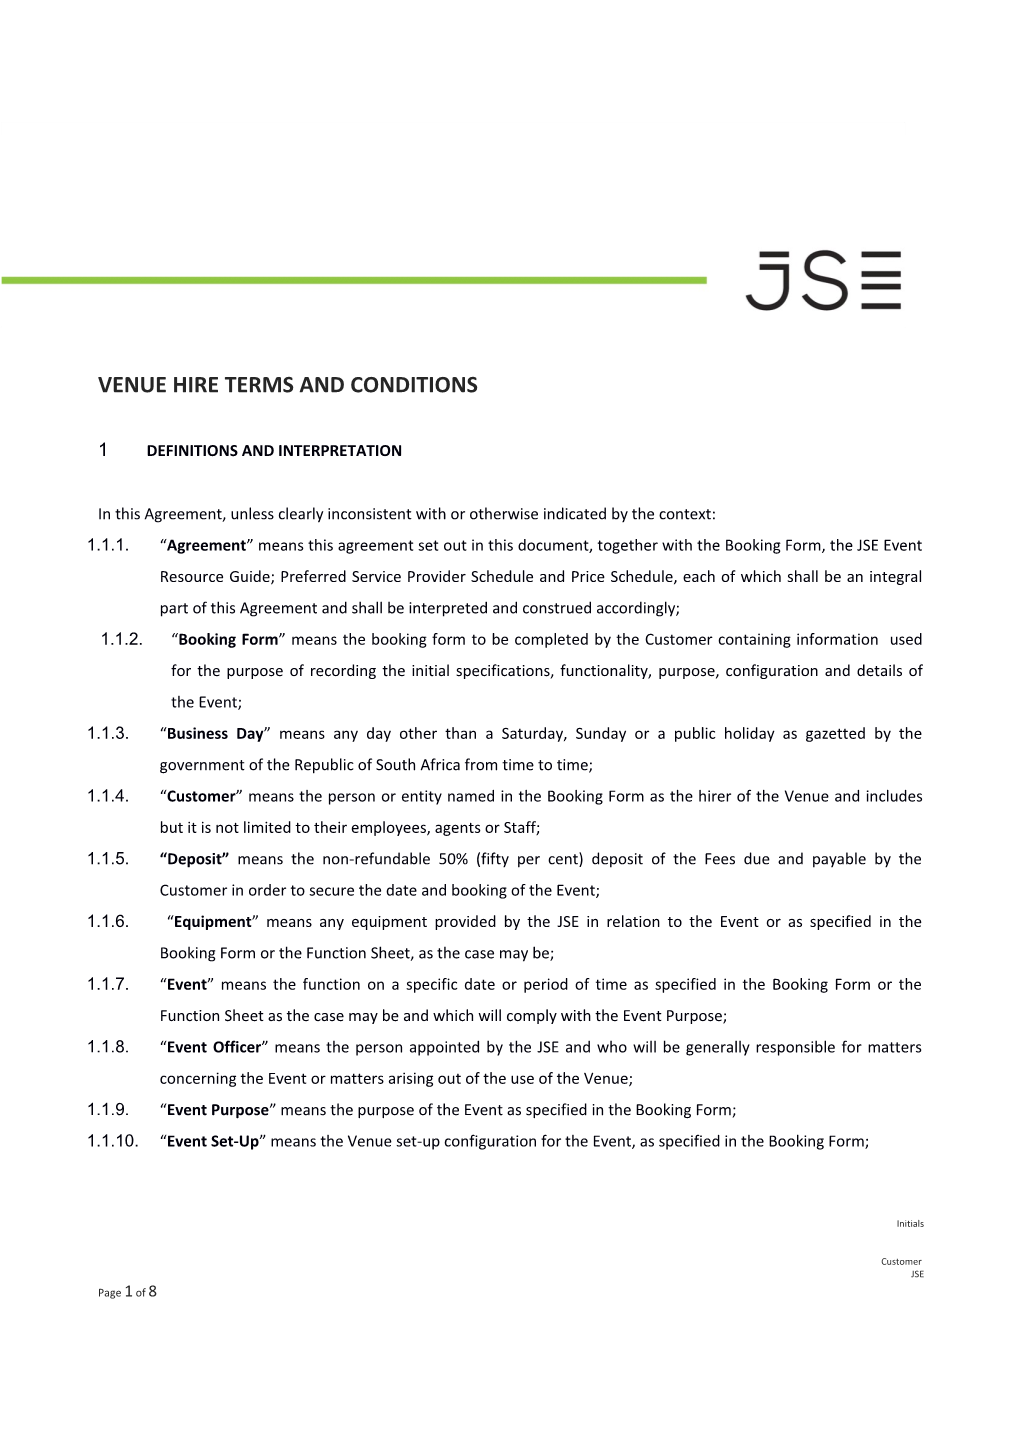 CT JSE Venue Hire Terms and Conditions